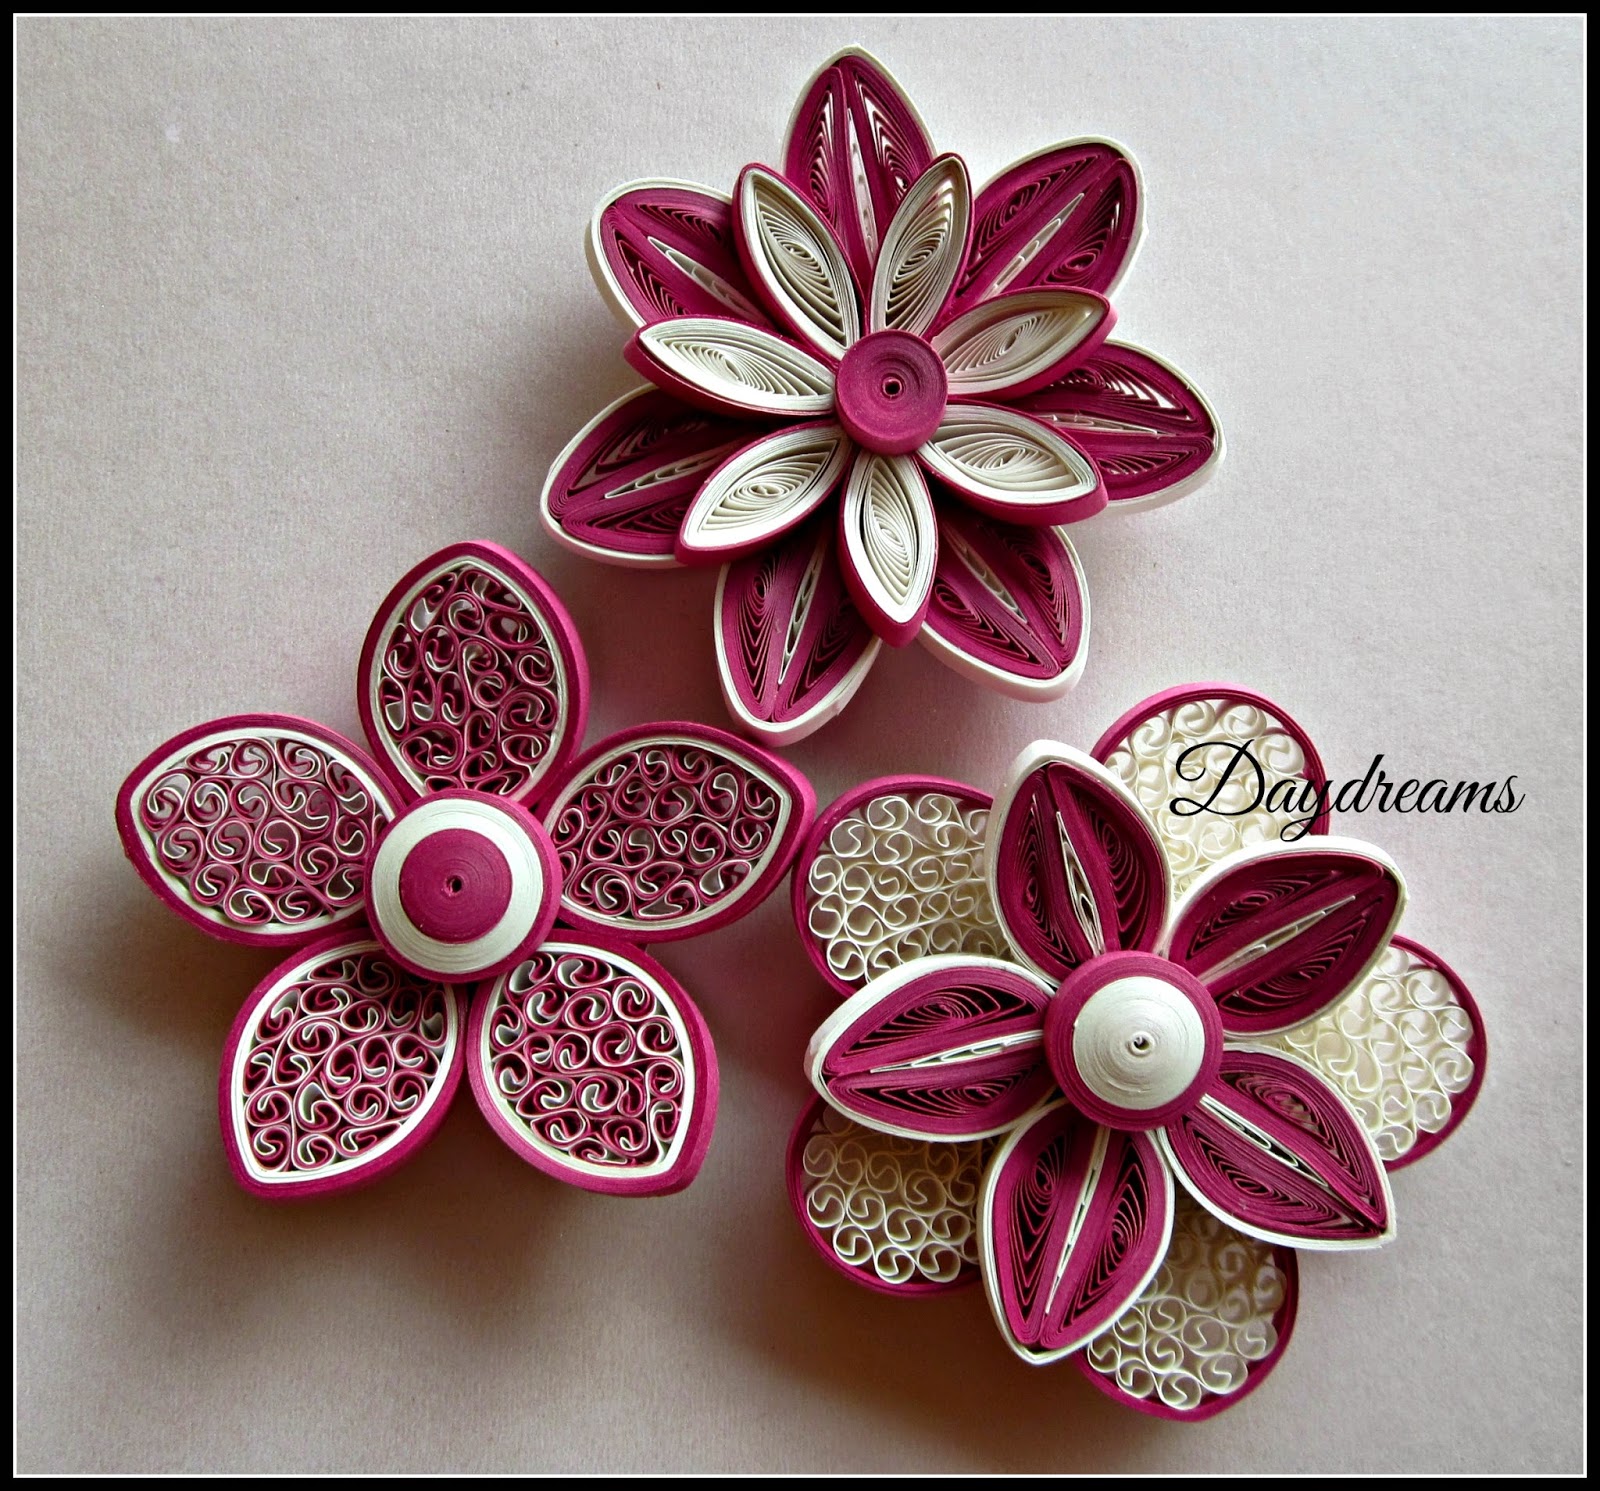 DAYDREAMS: For my love for Quilled flowers